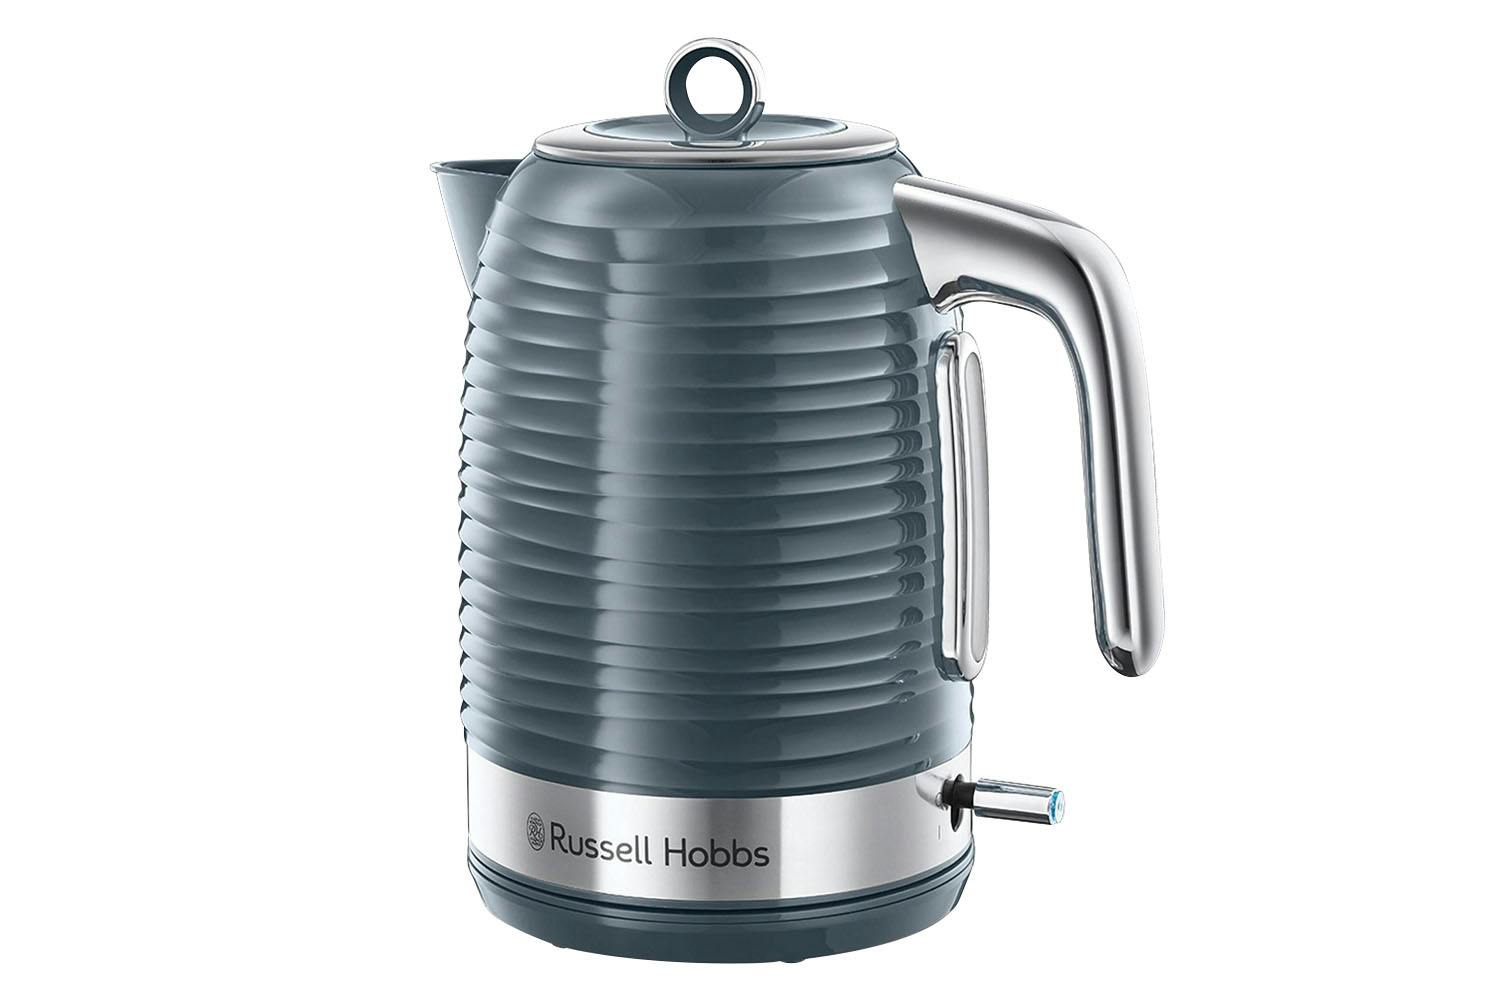 Russell Hobbs 1.7L Inspire Electric Kettle | 24363 | Grey